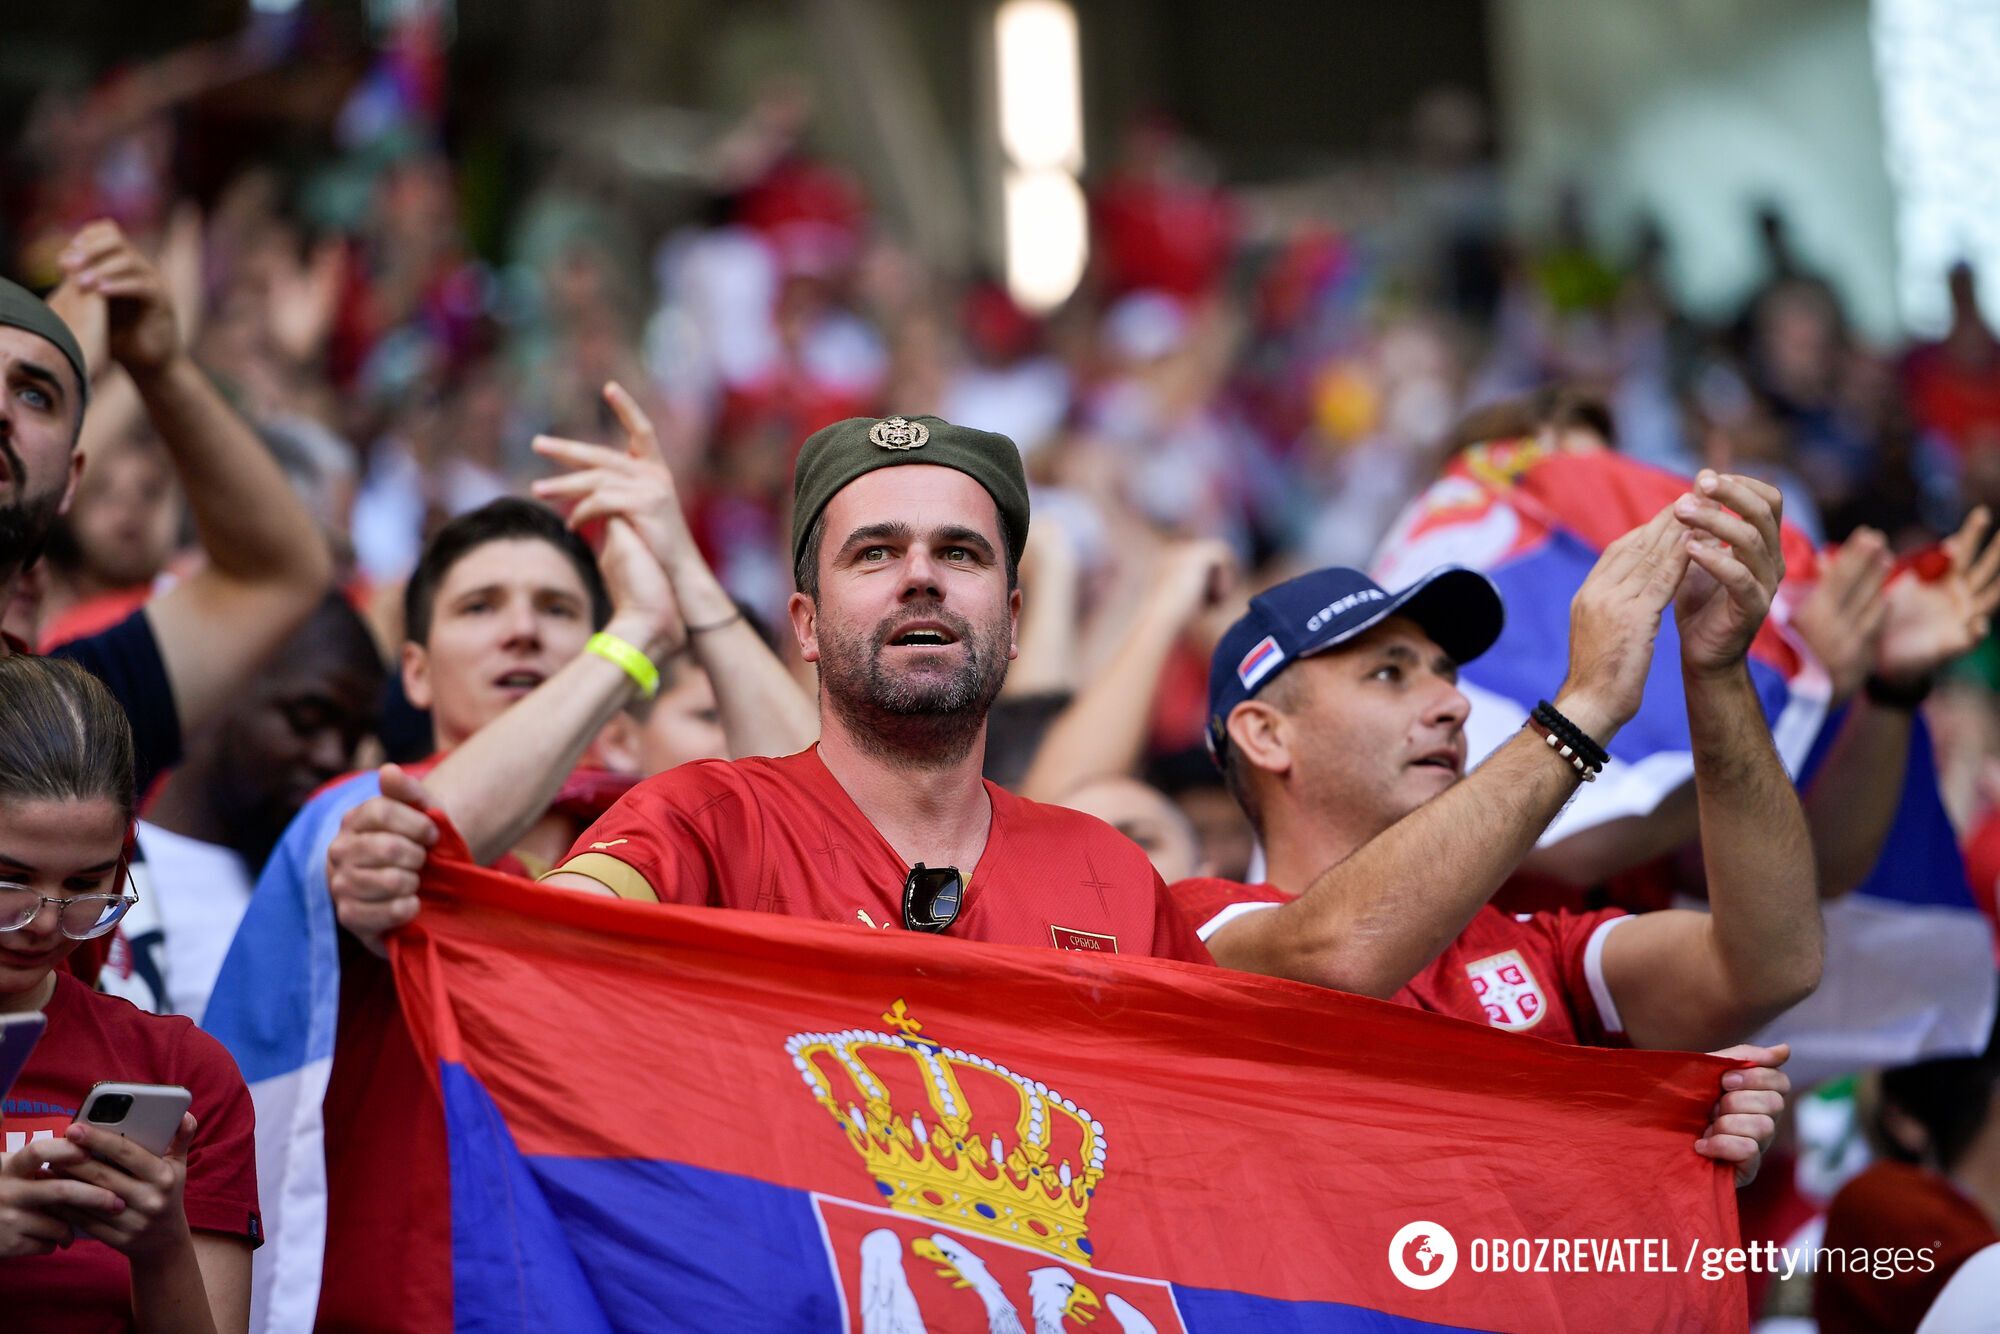 Everyone hates us: ex-football player of the Russian national team spoke about Russians being humiliated in ''friendly Serbia''